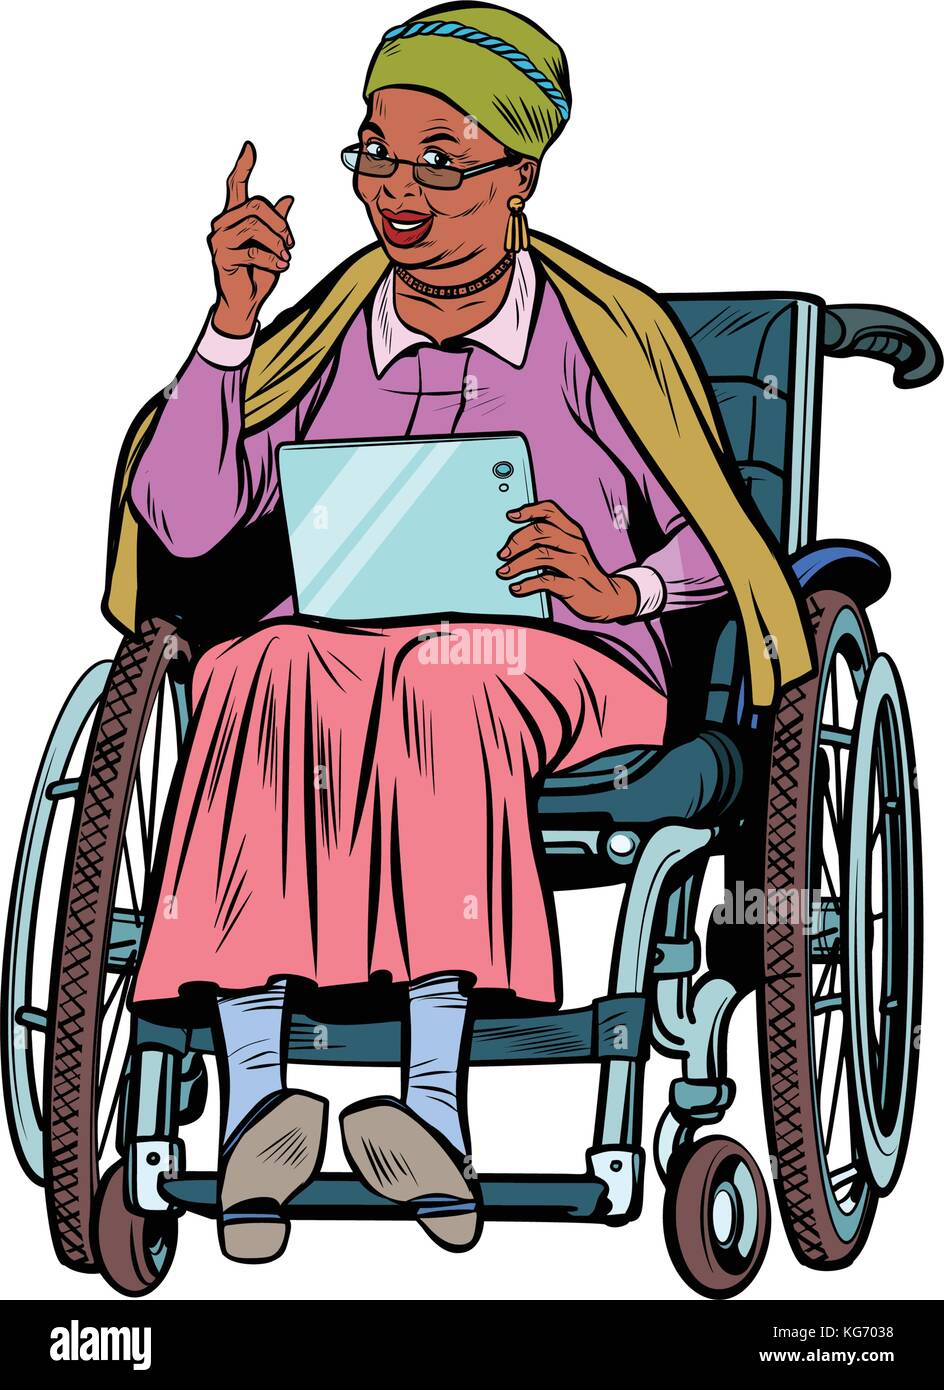 https://c8.alamy.com/comp/KG7038/african-elderly-woman-disabled-person-in-a-wheelchair-gadget-tablet-KG7038.jpg